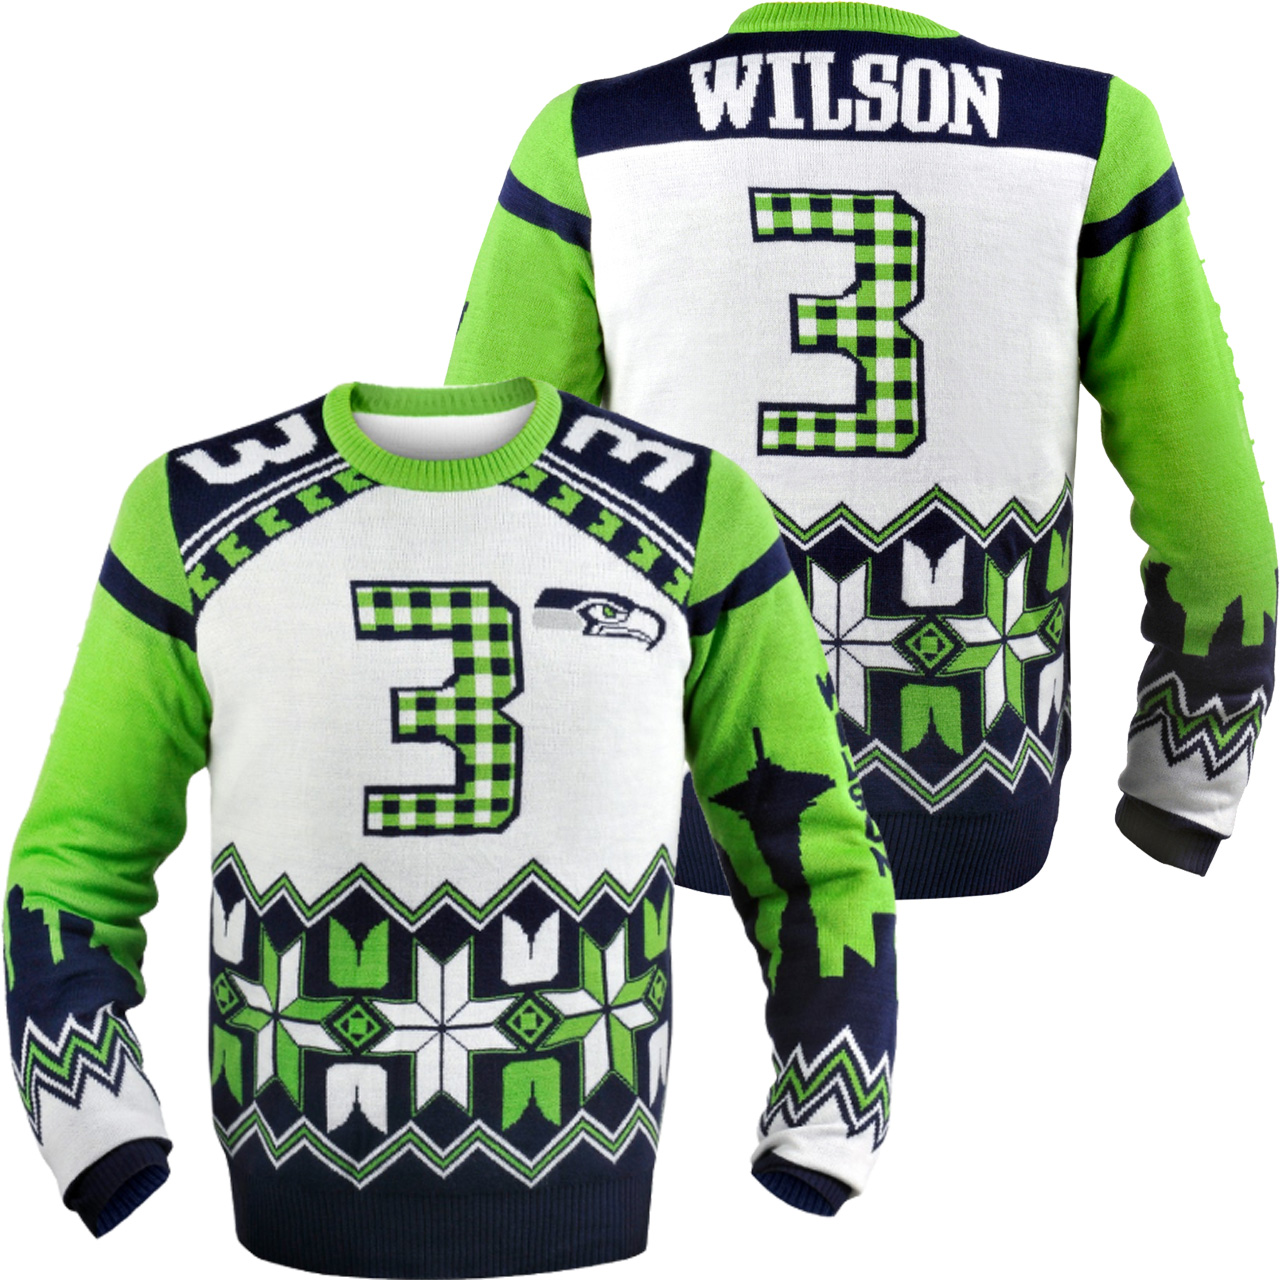 [ AWESOME ] Russell Wilson #3 Seattle Seahawks NFL Ugly Player Sweater – Saleoff 081221